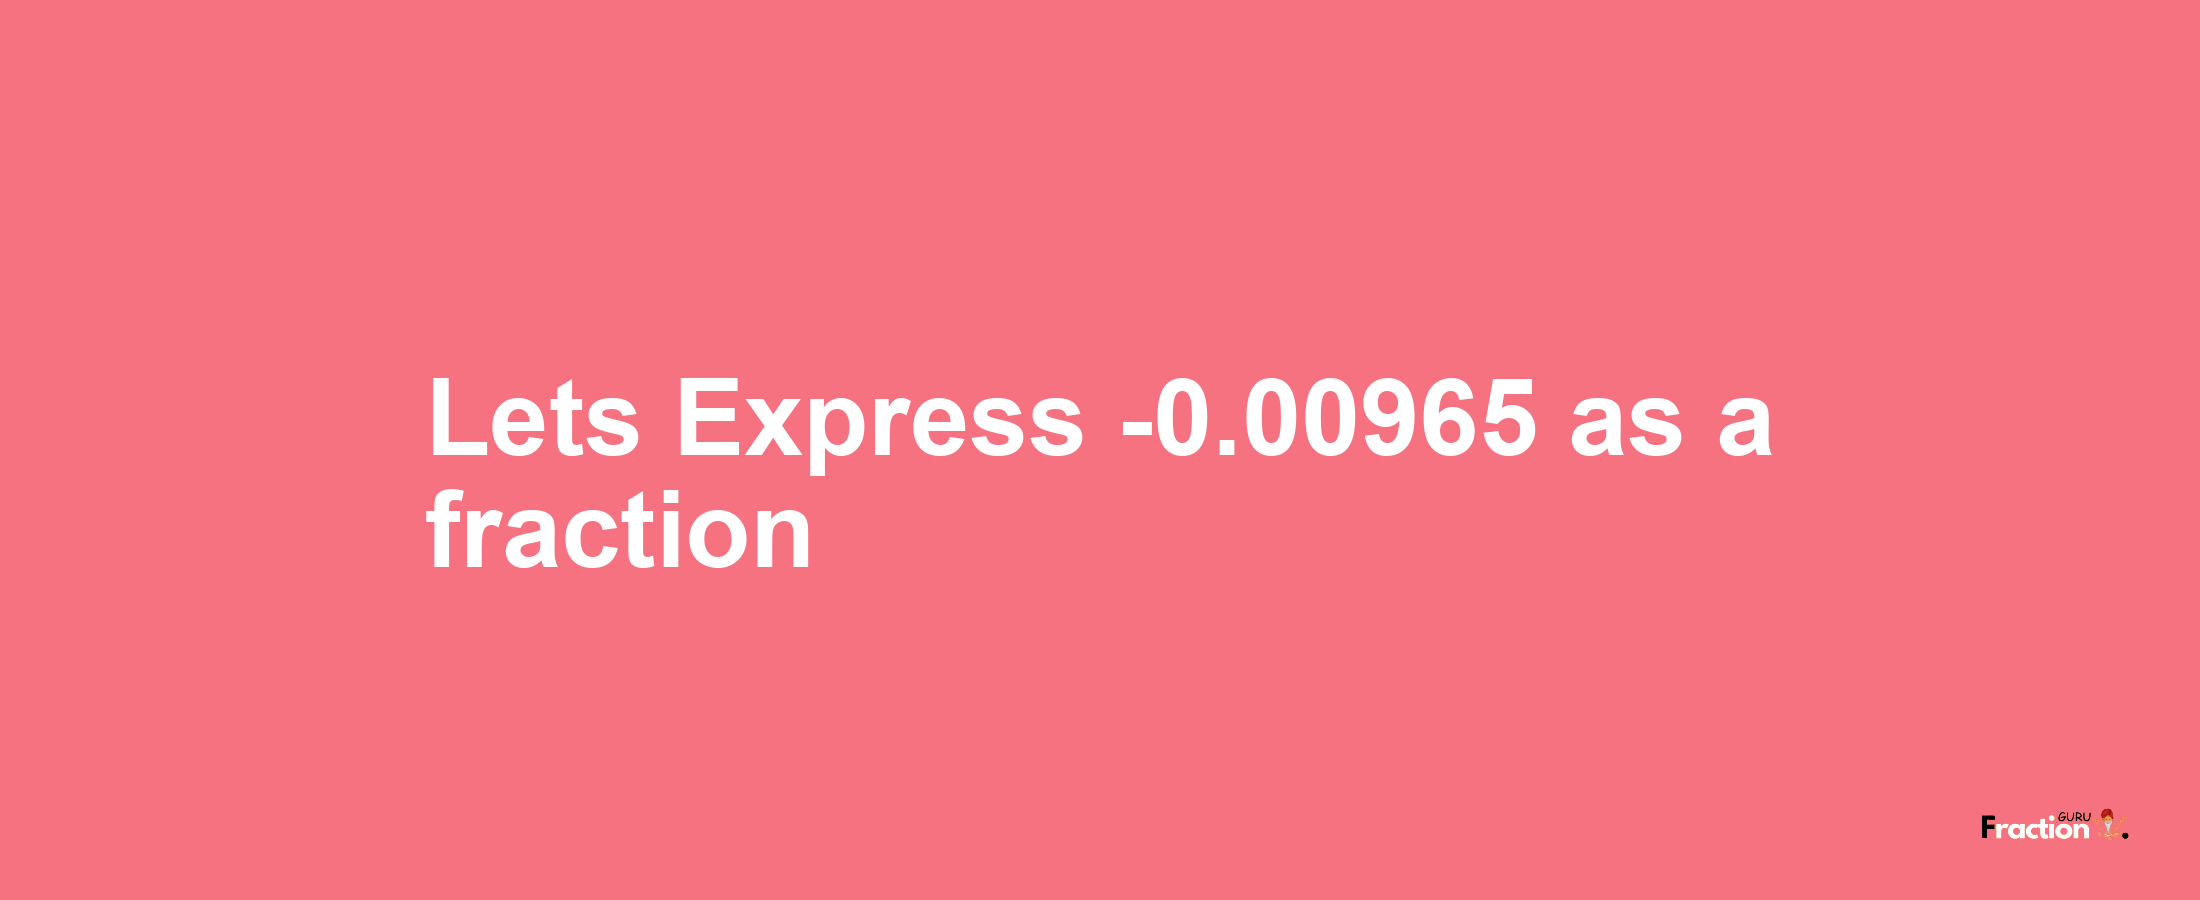 Lets Express -0.00965 as afraction